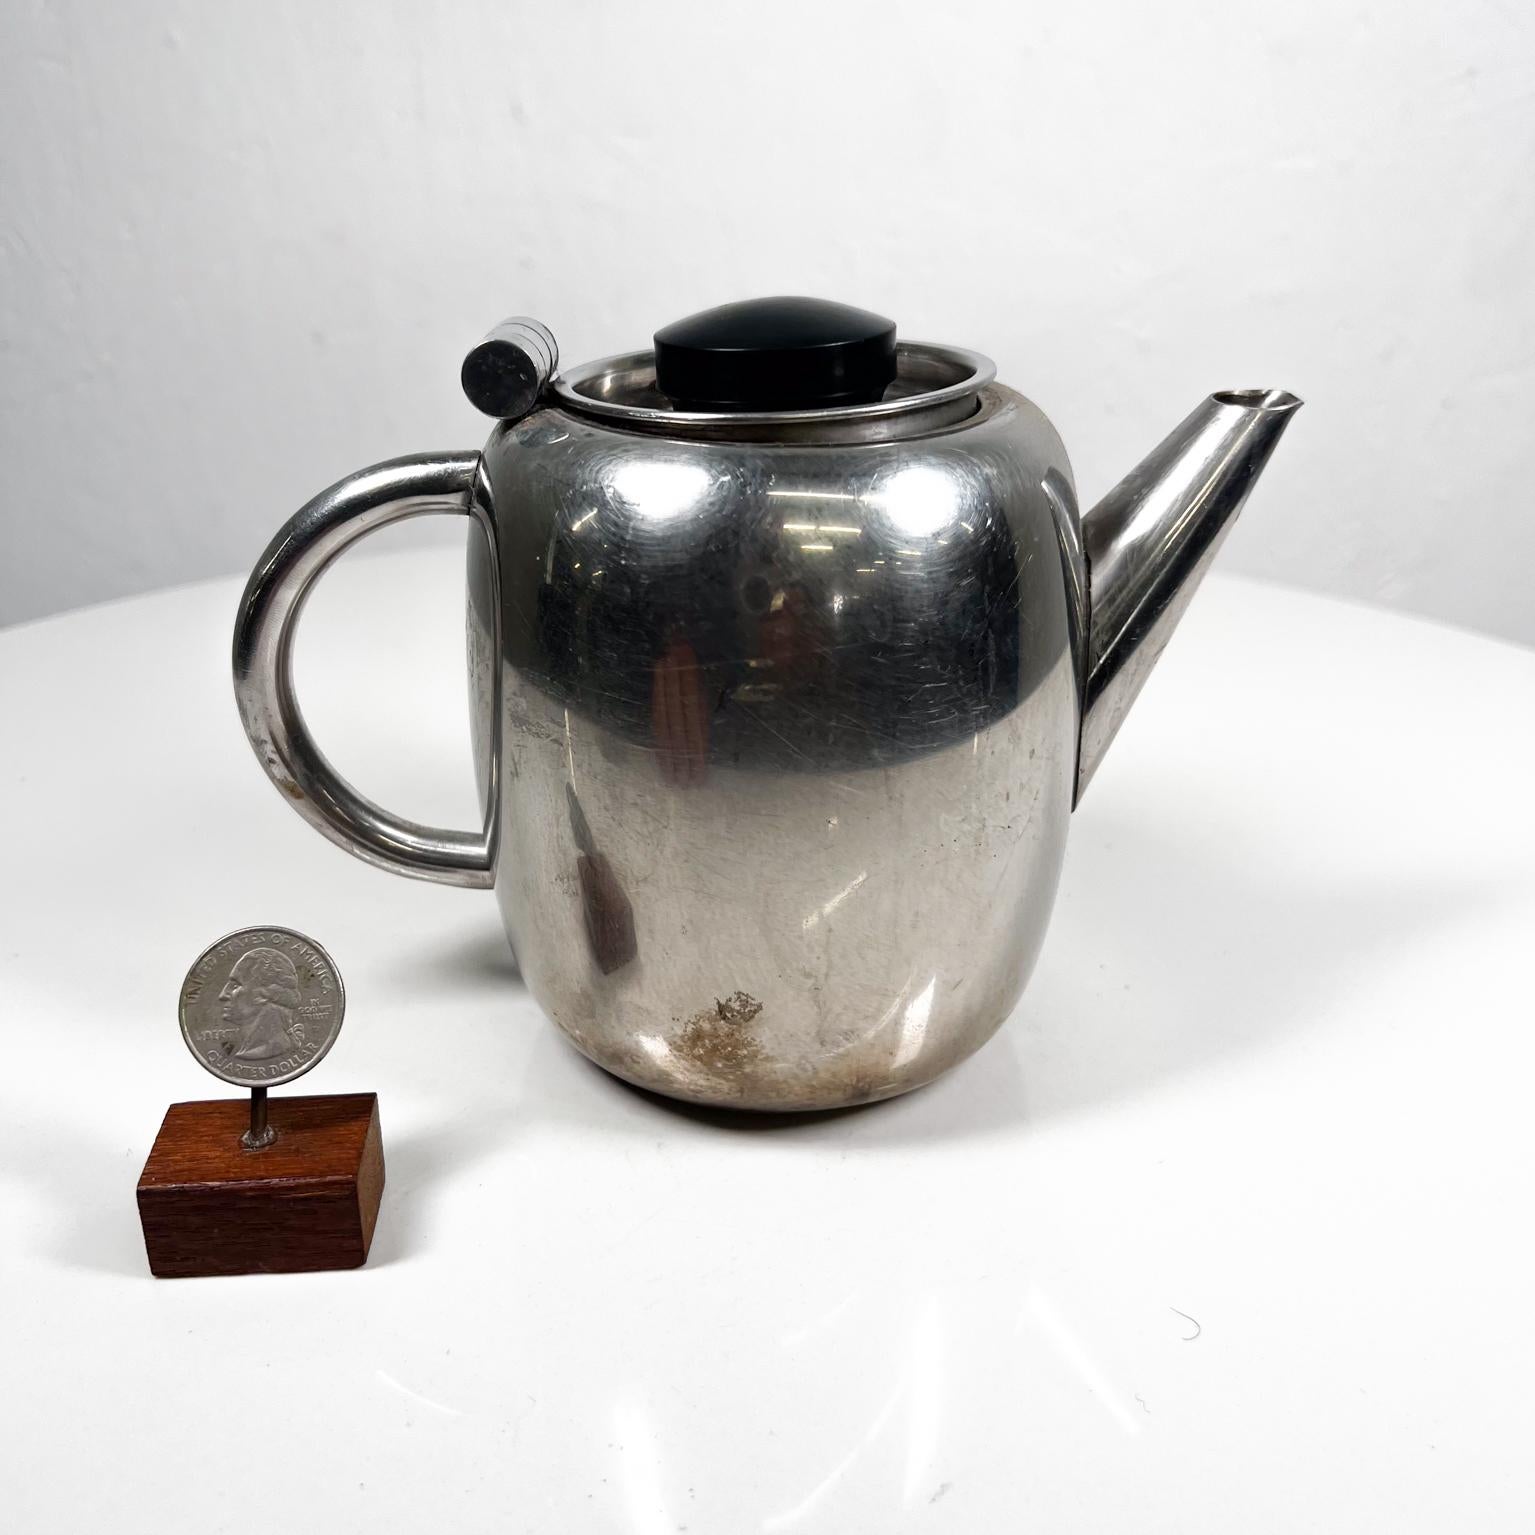 Vintage Art Deco Petite Tea Pot Stainless Steel
6.75 x 4 w x 5 h
No stamp.
Fading discoloration. Vintage patina.
Original Preowned unrestored condition.
Refer to all images please.

